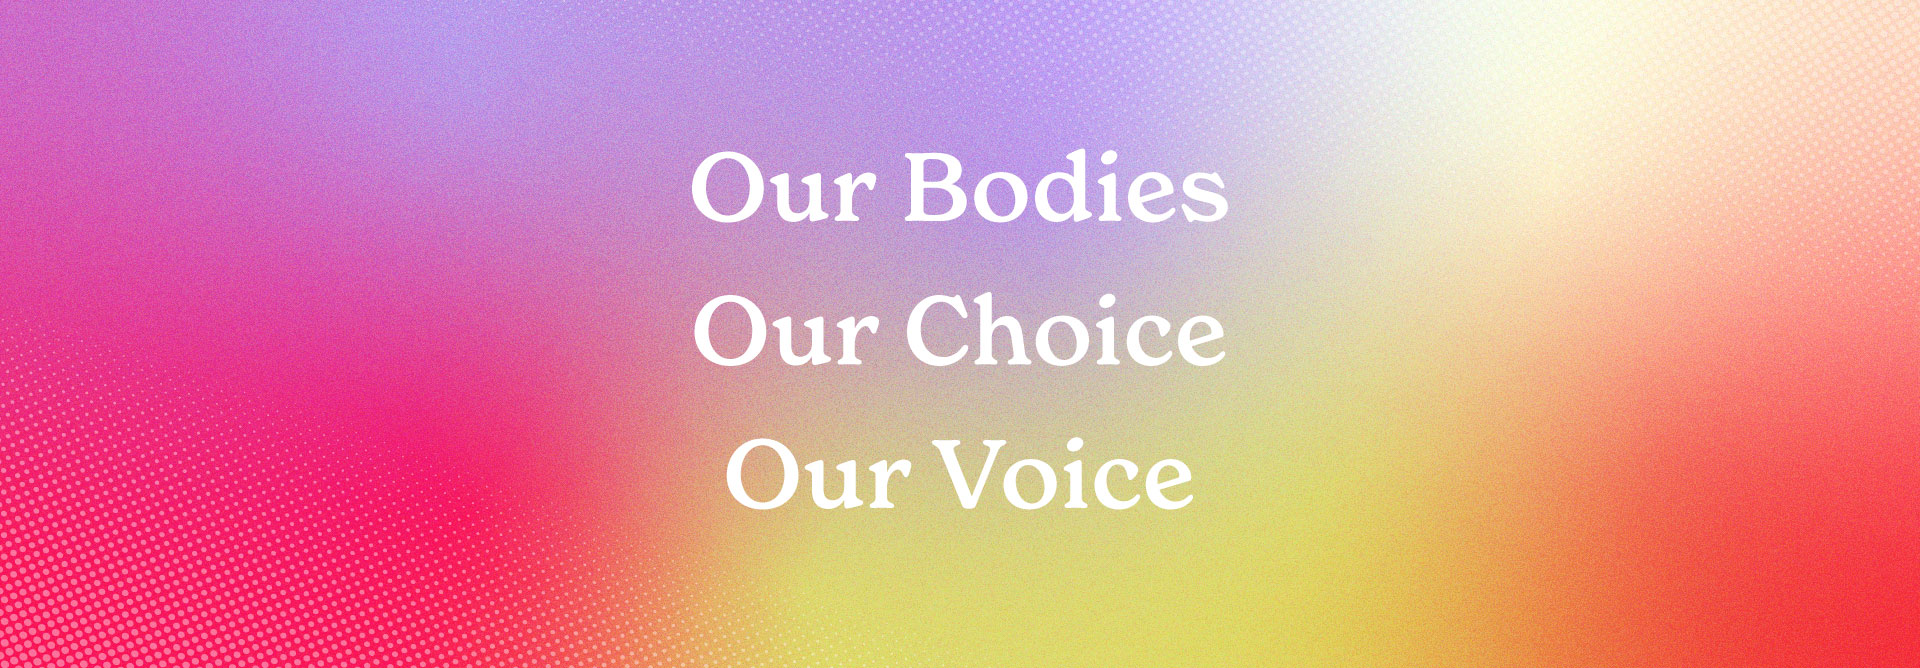 Our Bodies, Our Choice, Our Voice Website Header